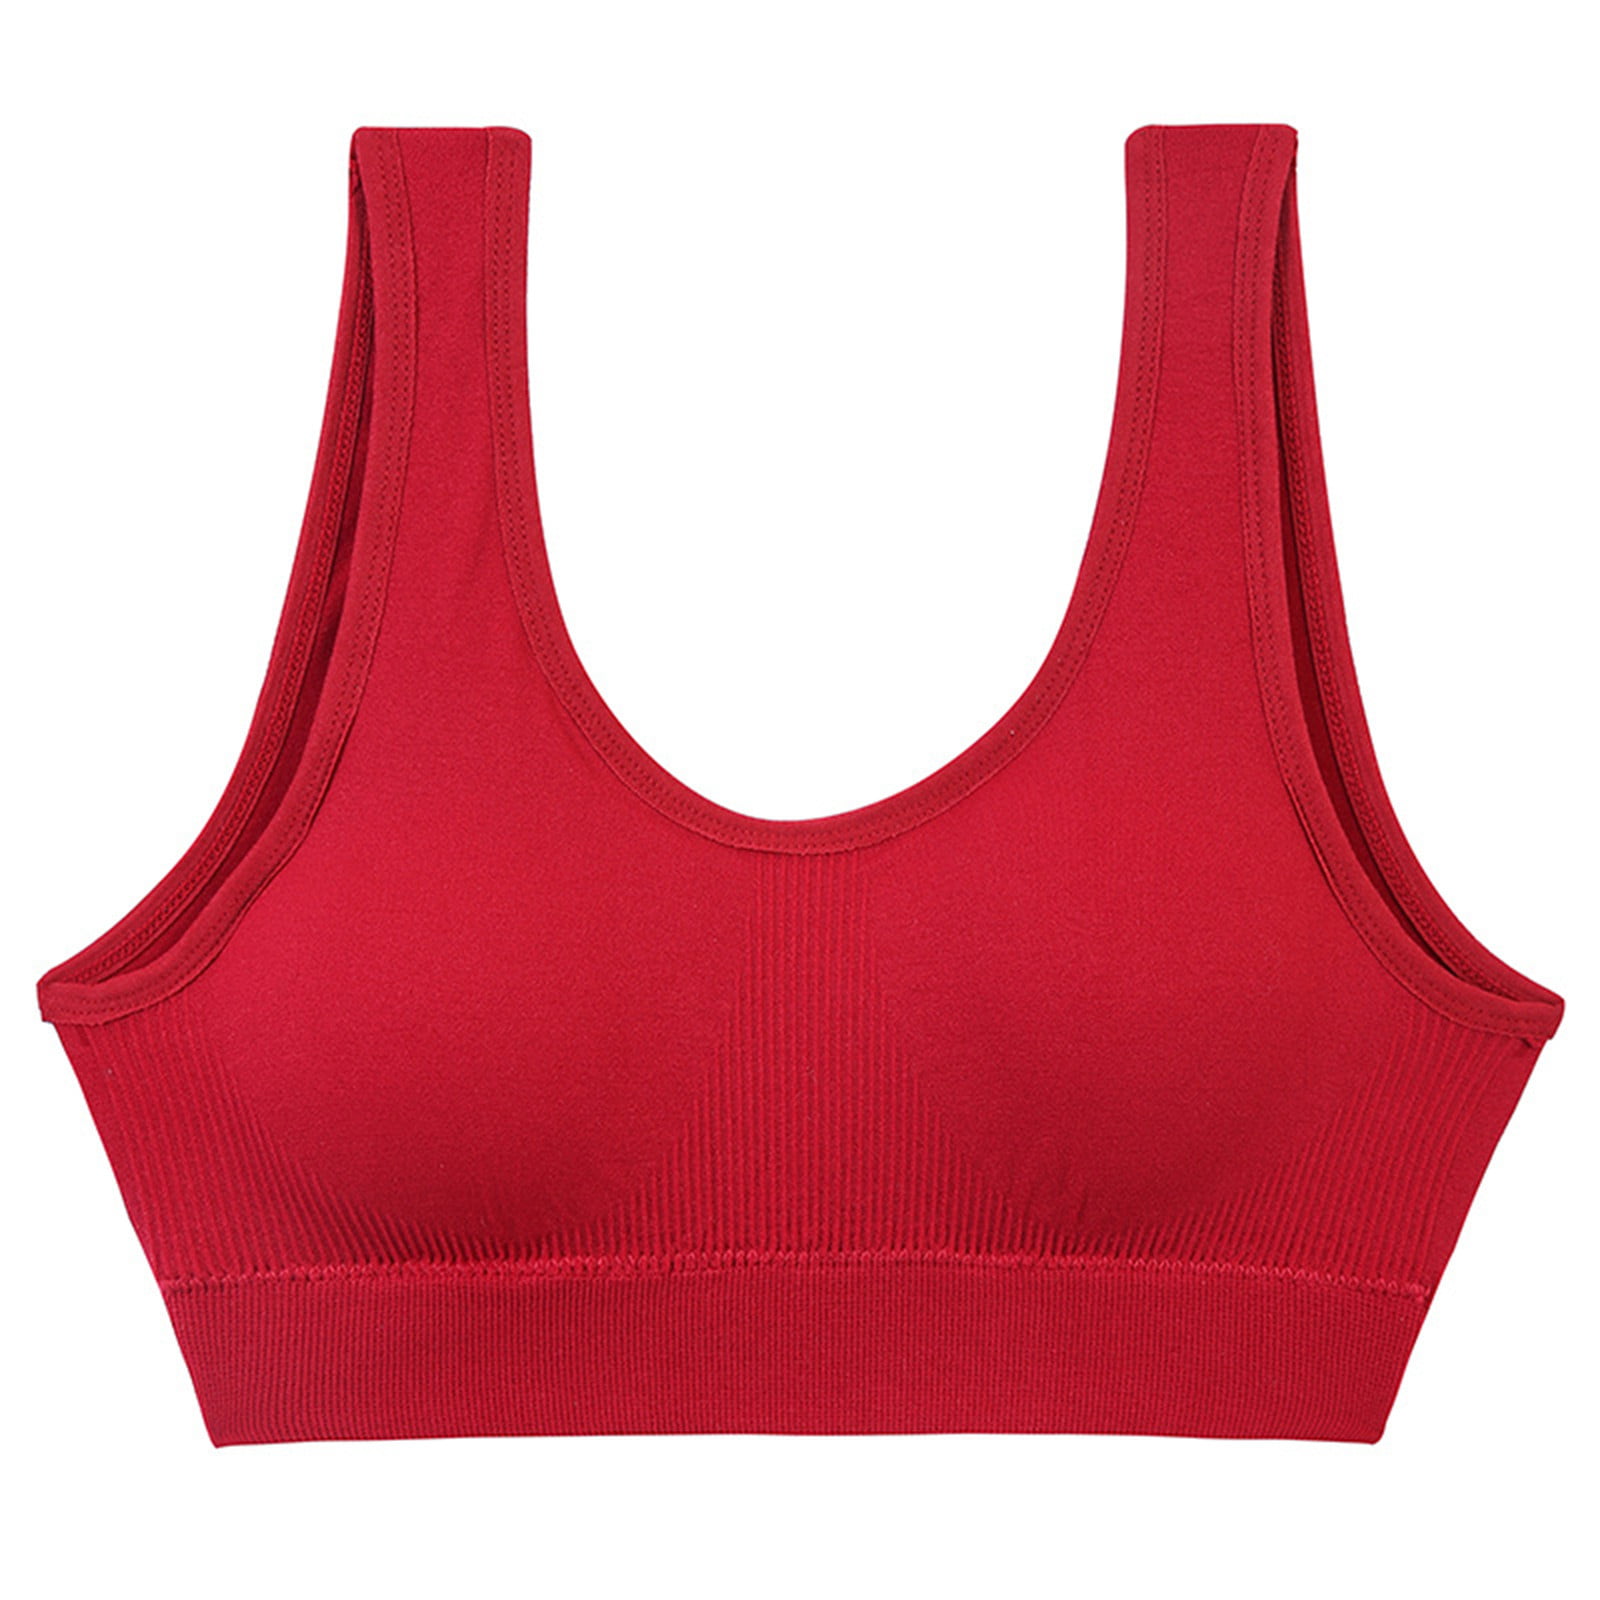 CAICJ98 Womens Lingerie High Support Sports Bras for Women, Splicing Mesh  Workout Sports Bra for Plus Size Red,M 